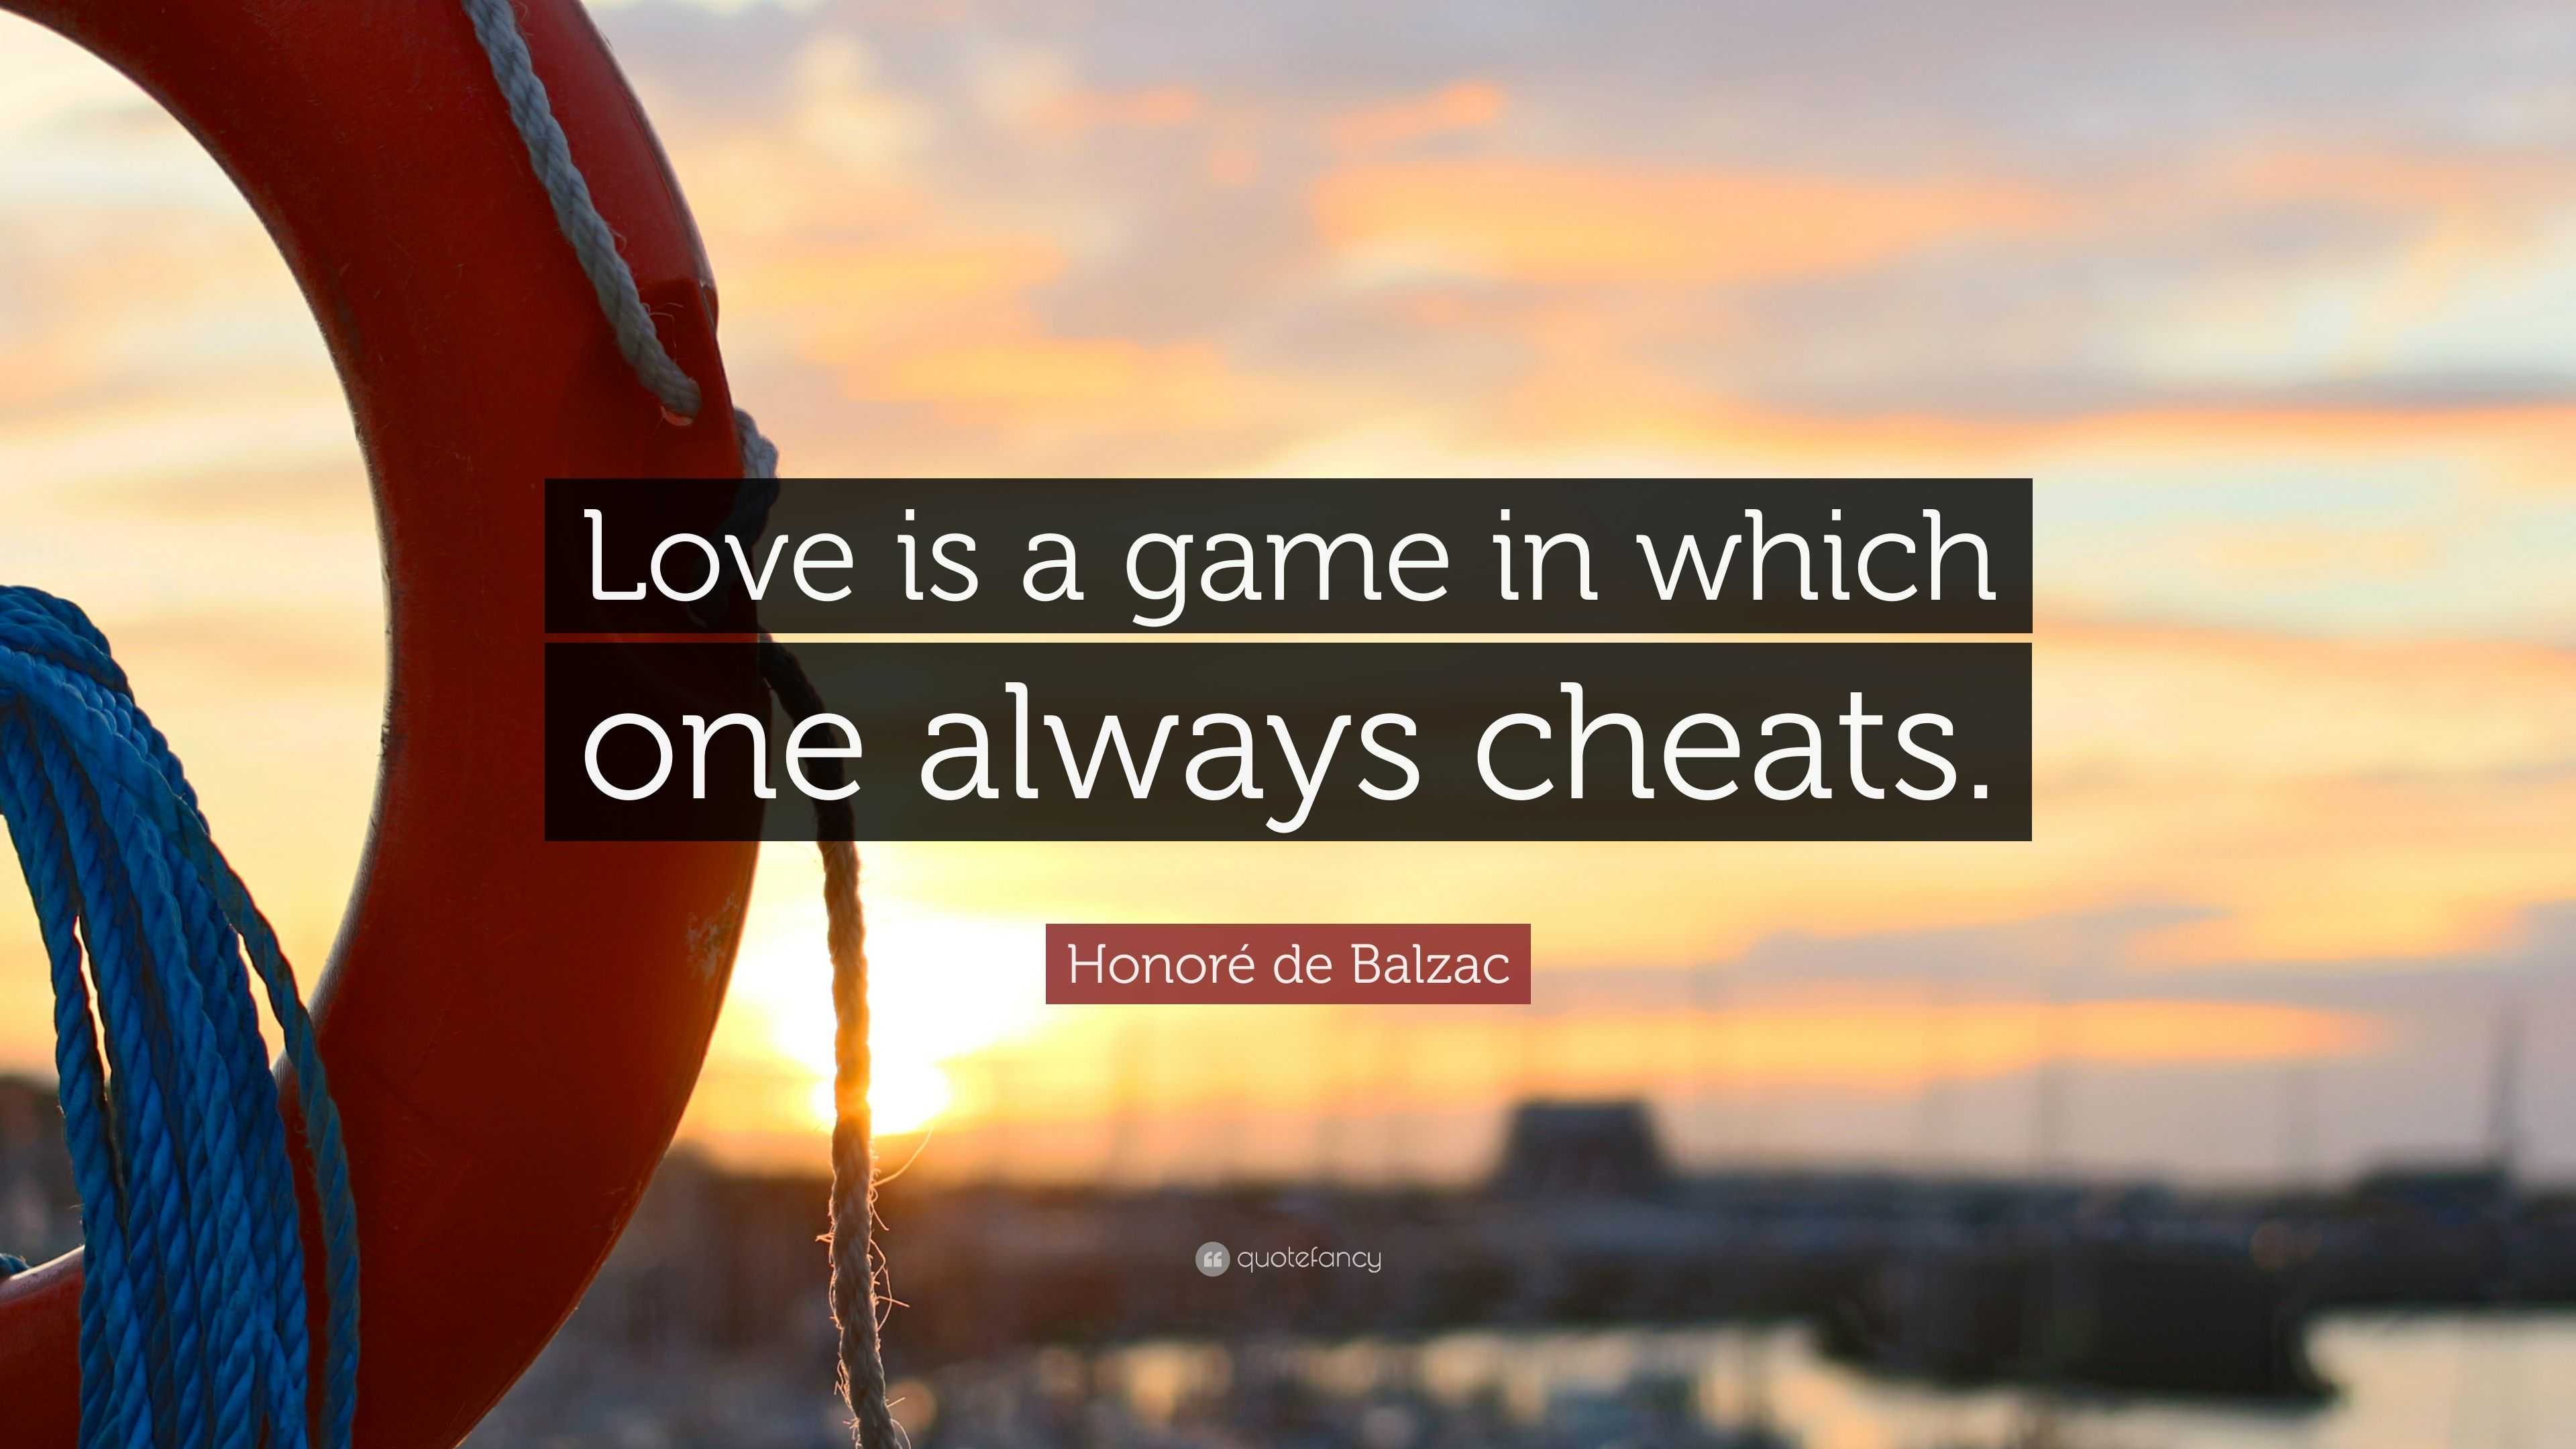 Honoré de Balzac Quote: “Love is a game in which one always cheats.”